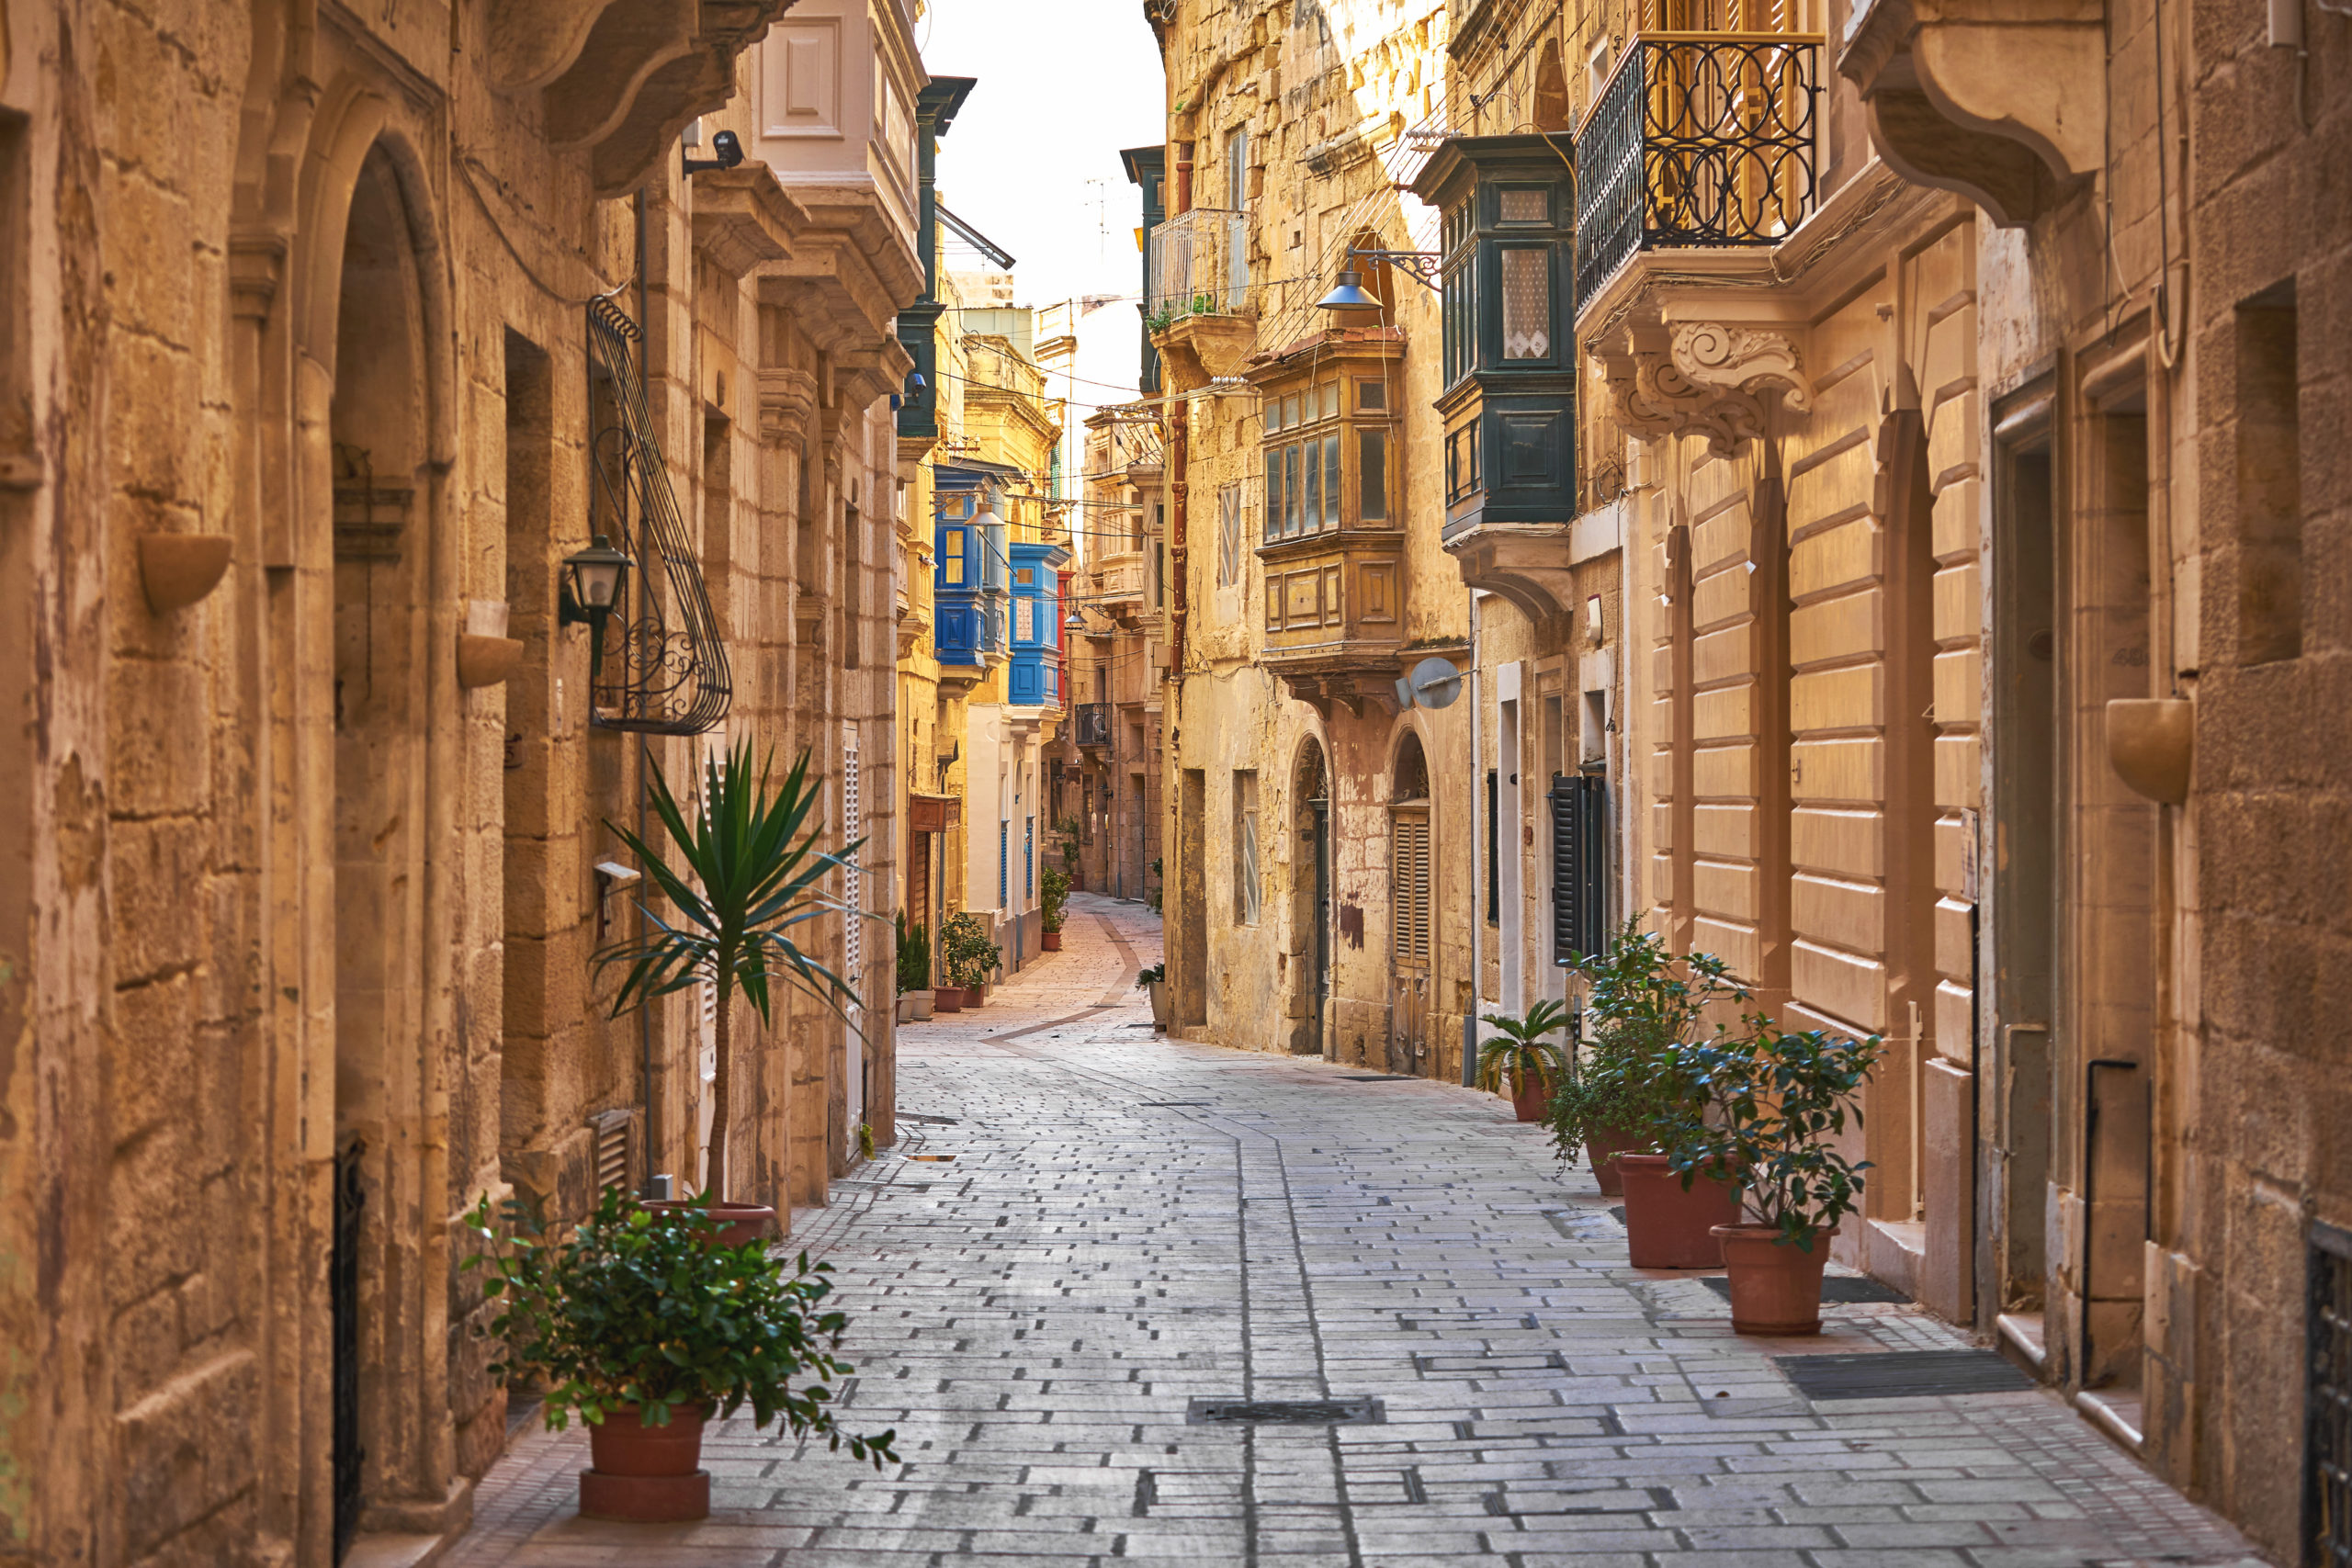 Malta: Inside the new measures to support businesses